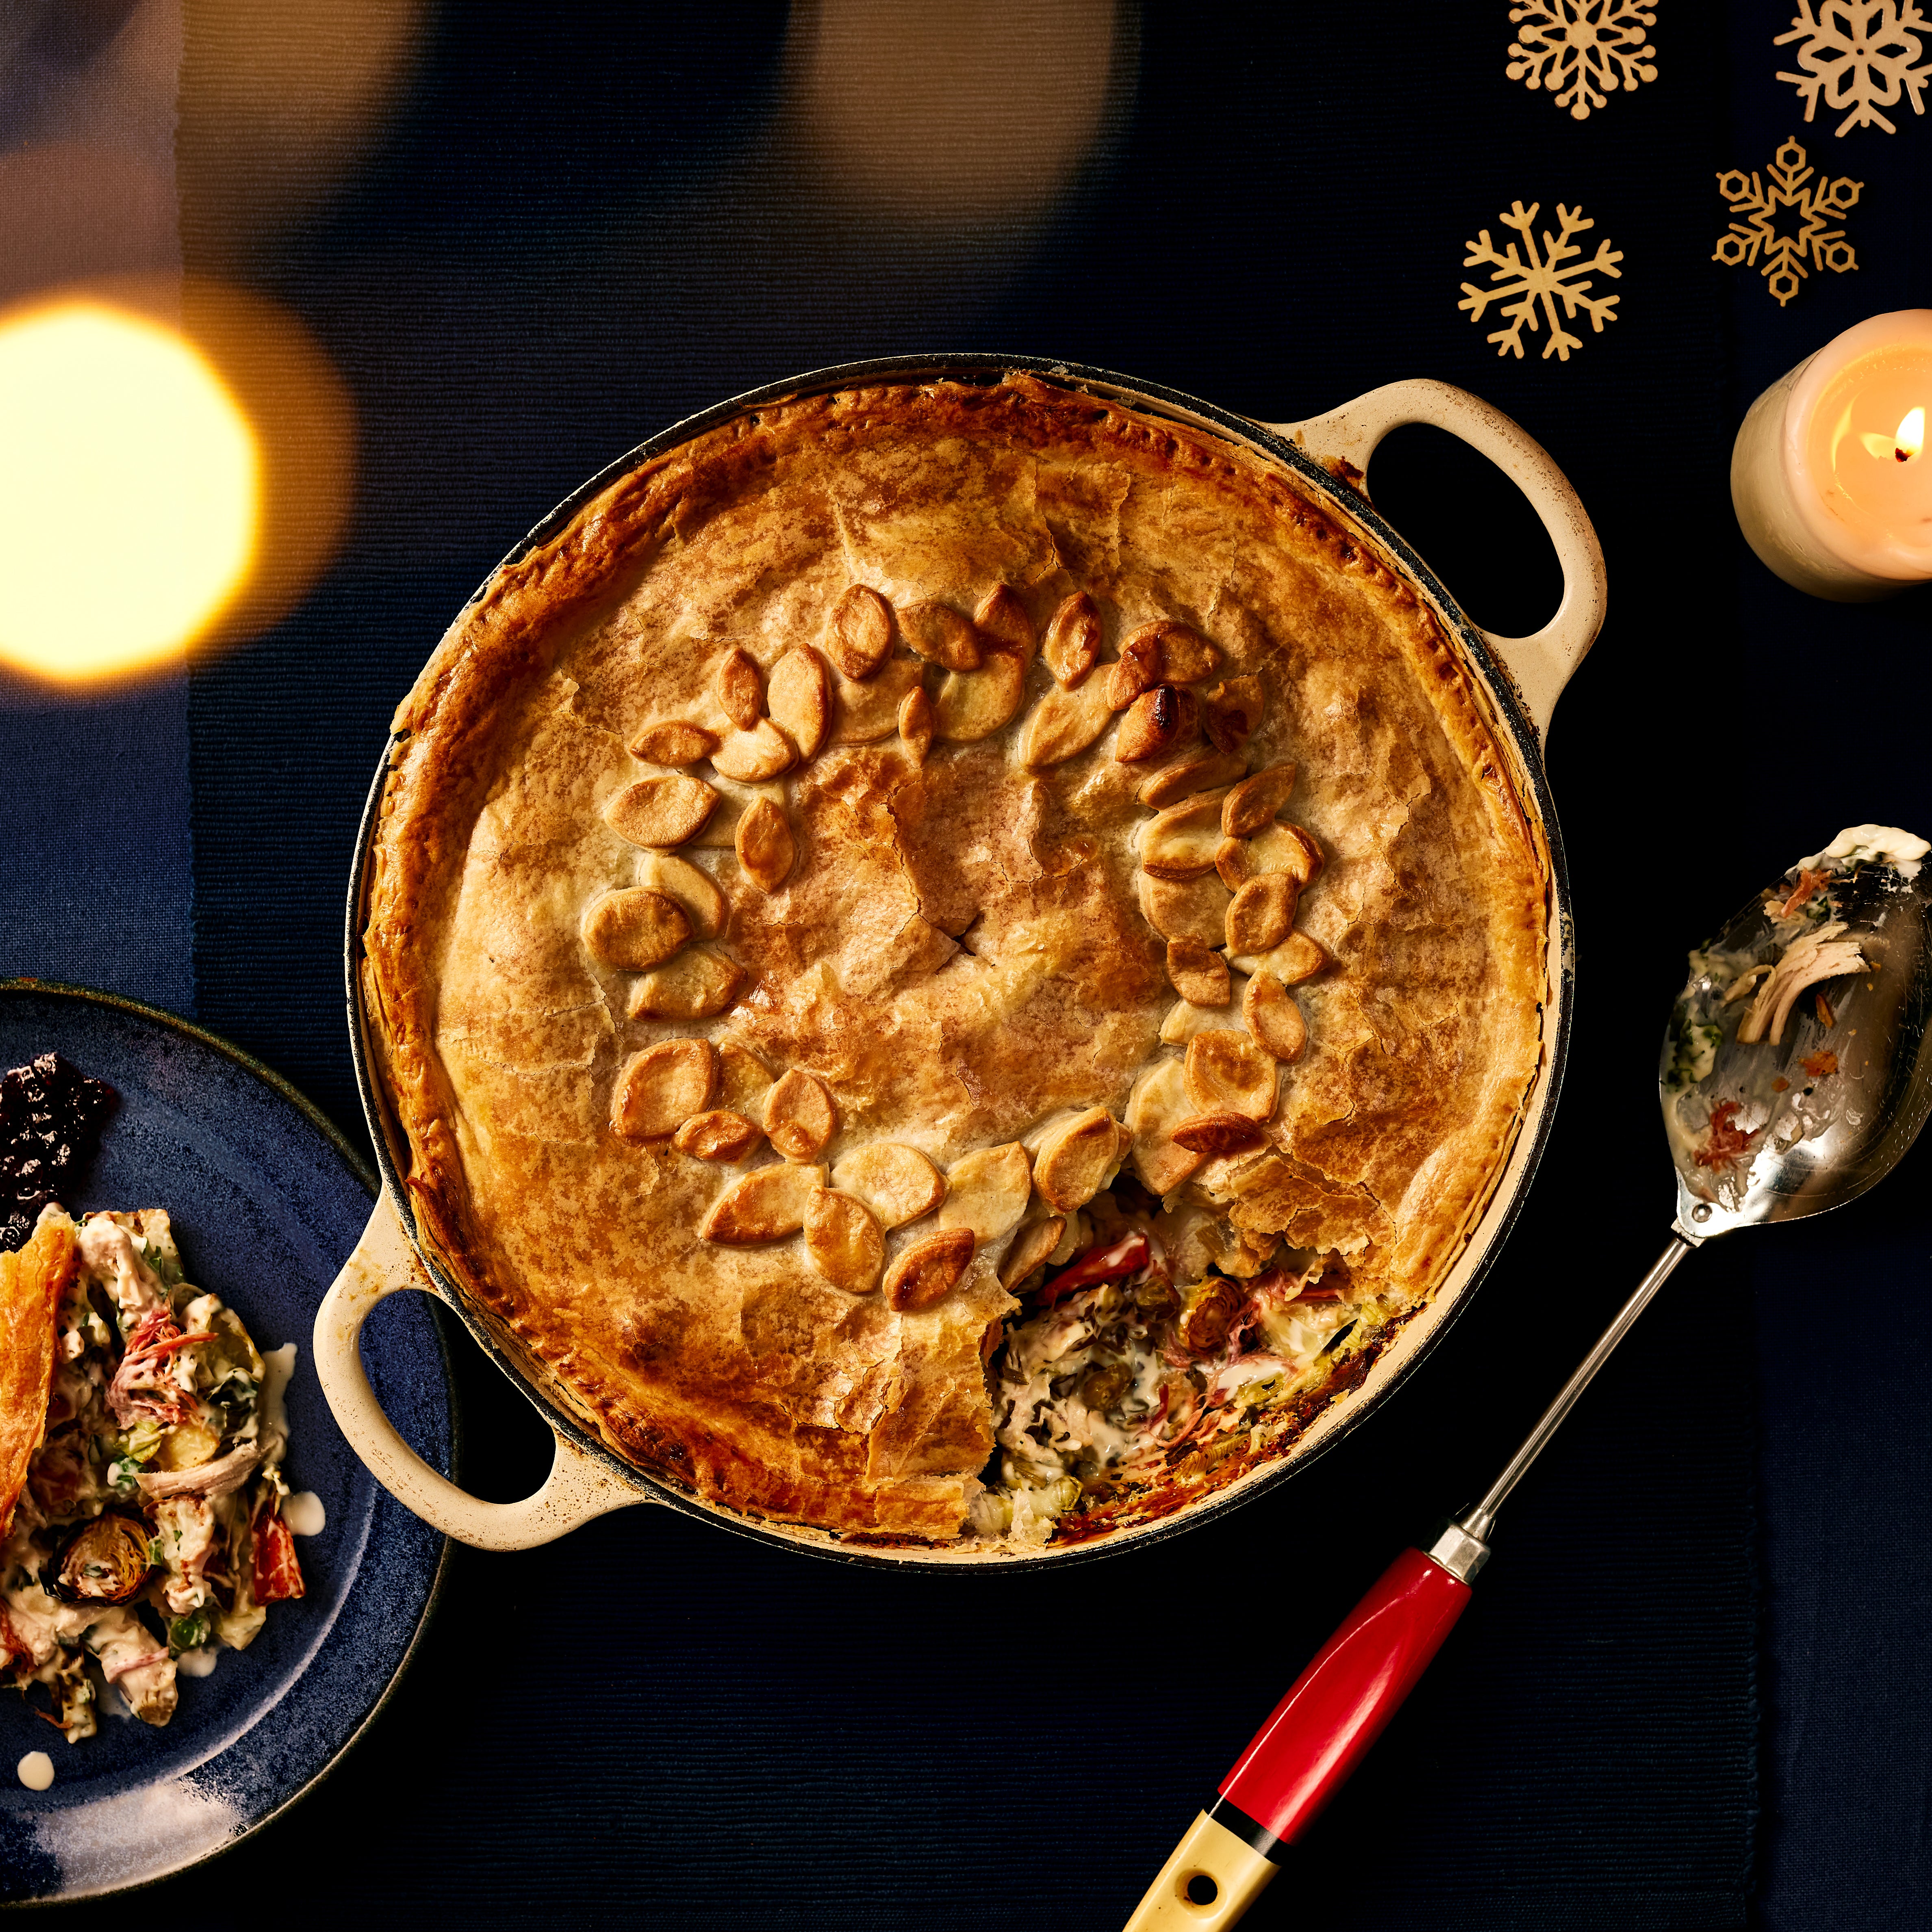 Not time for faff? Chuck all your leftovers all in a big ’ol pie